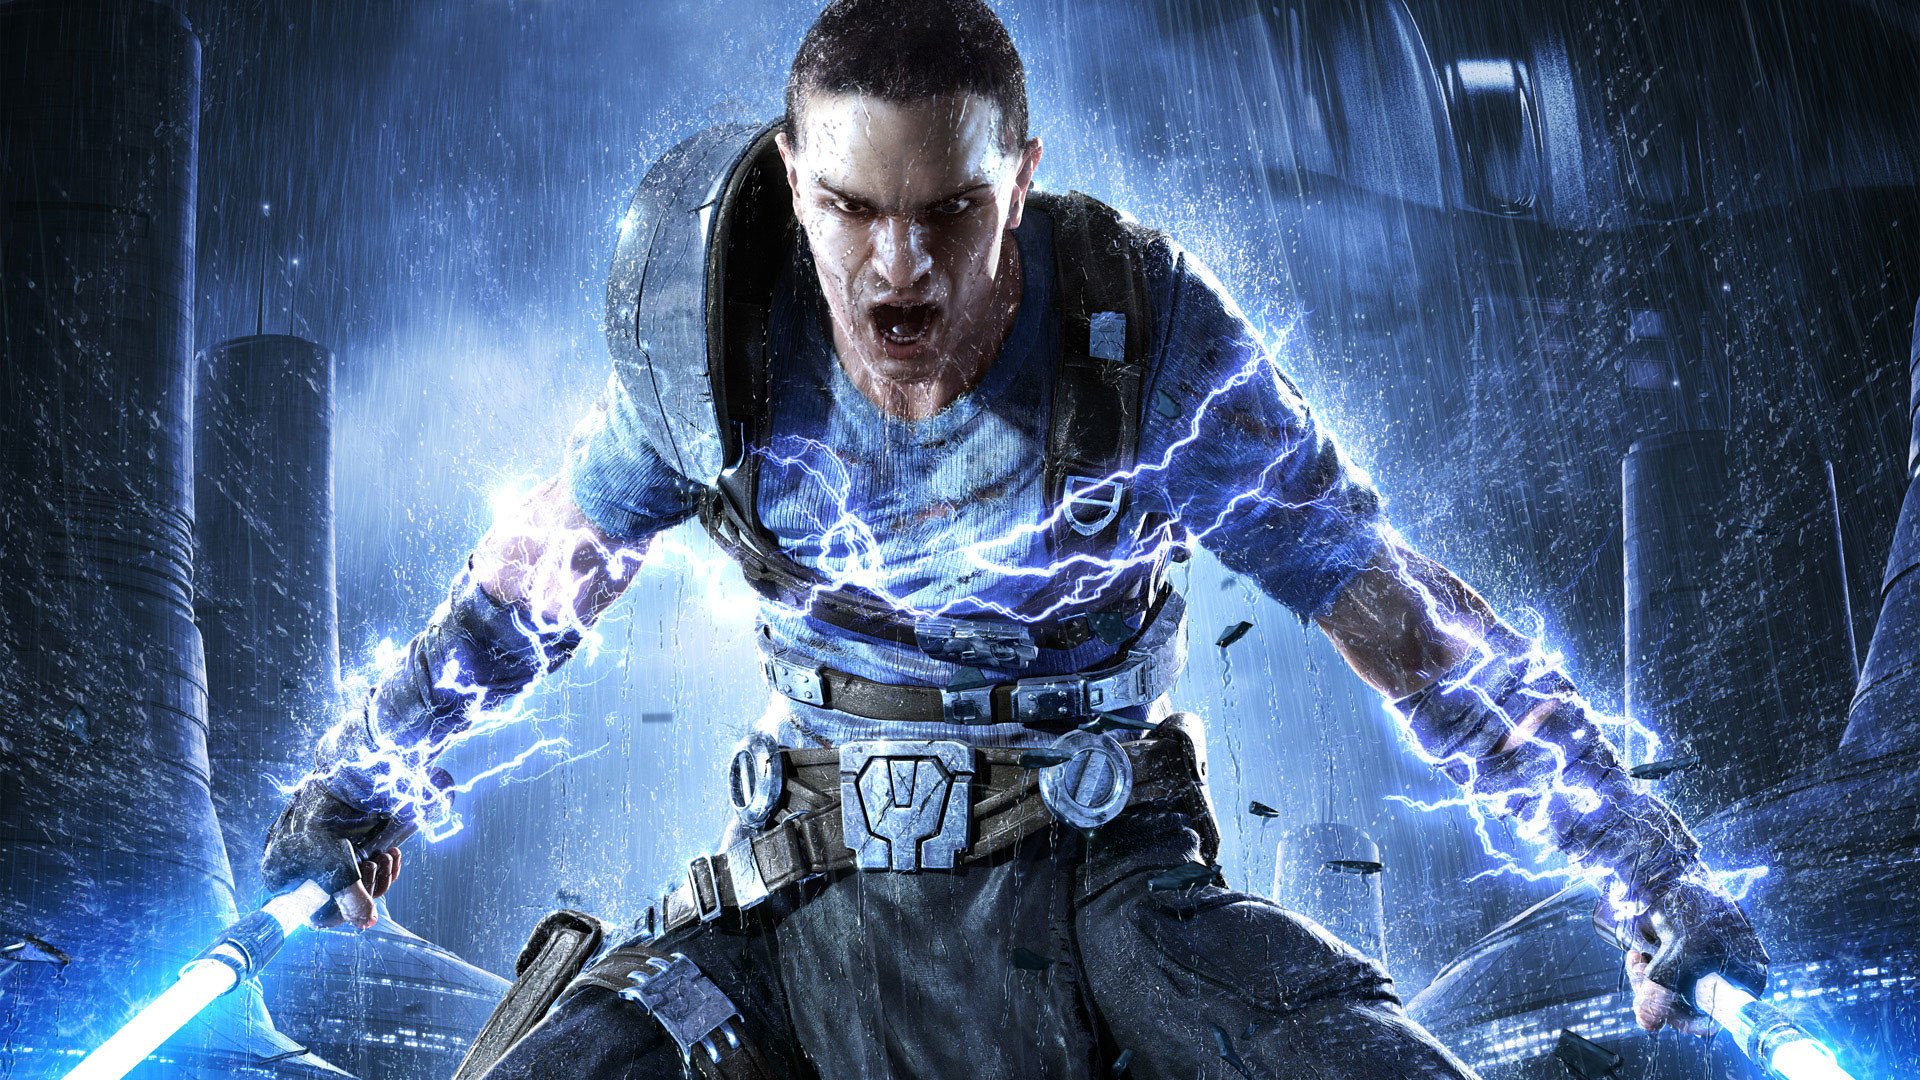 1920x1080 Star Wars: The Force Unleashed 2 1080p Wallpaper